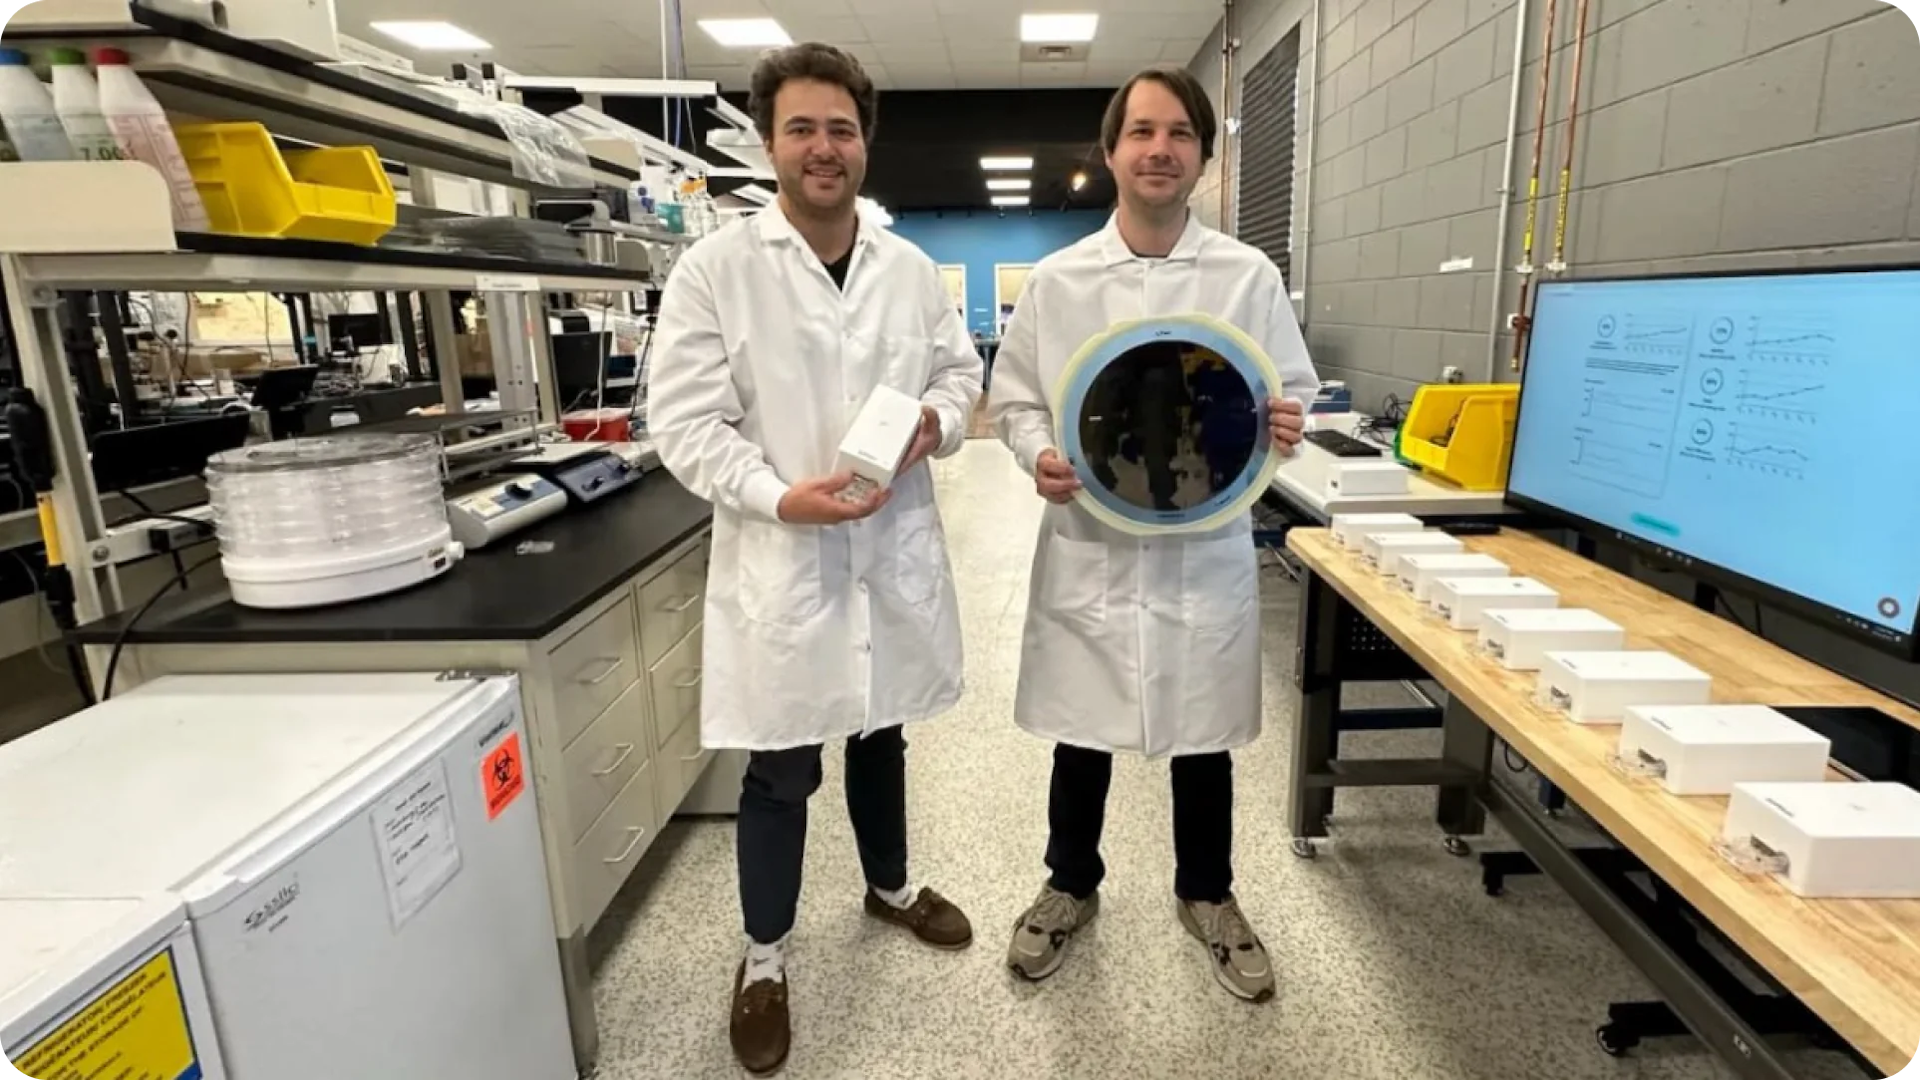 Co-founders in a lab